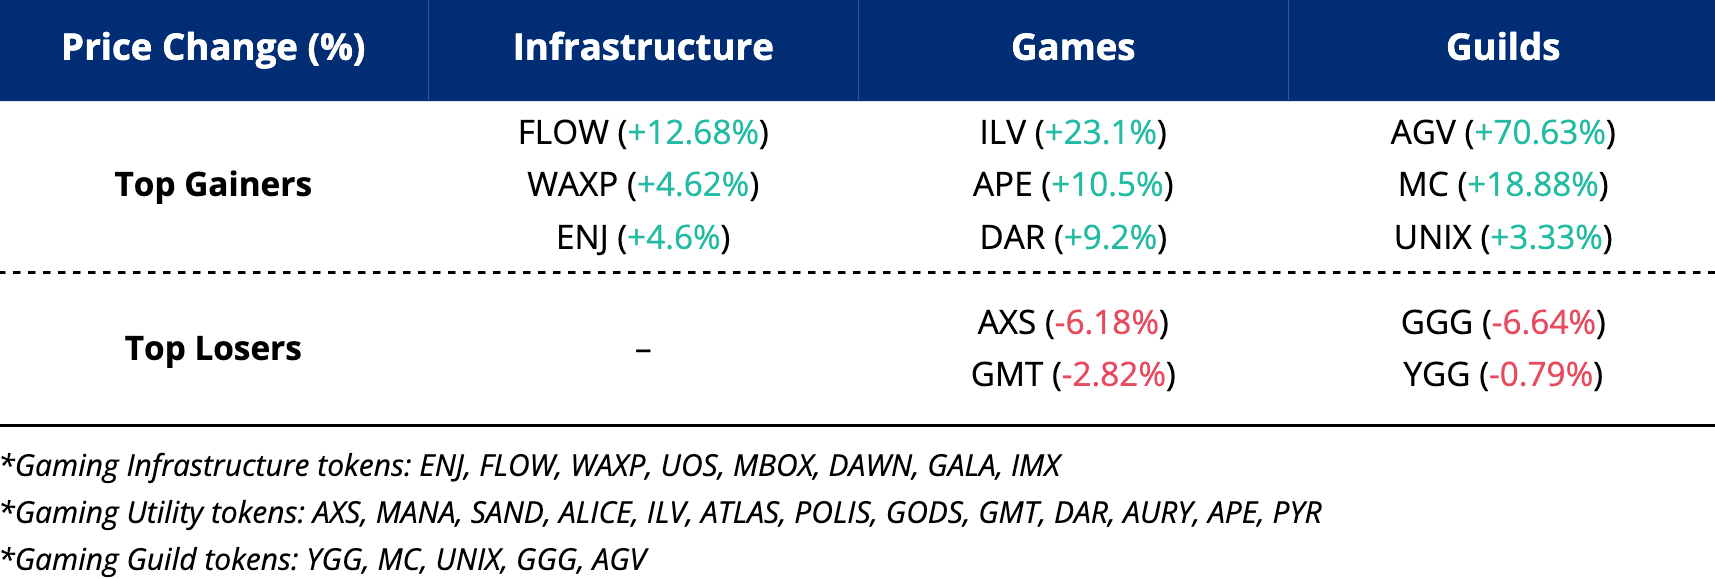 GameFi Top Gainers and Losers